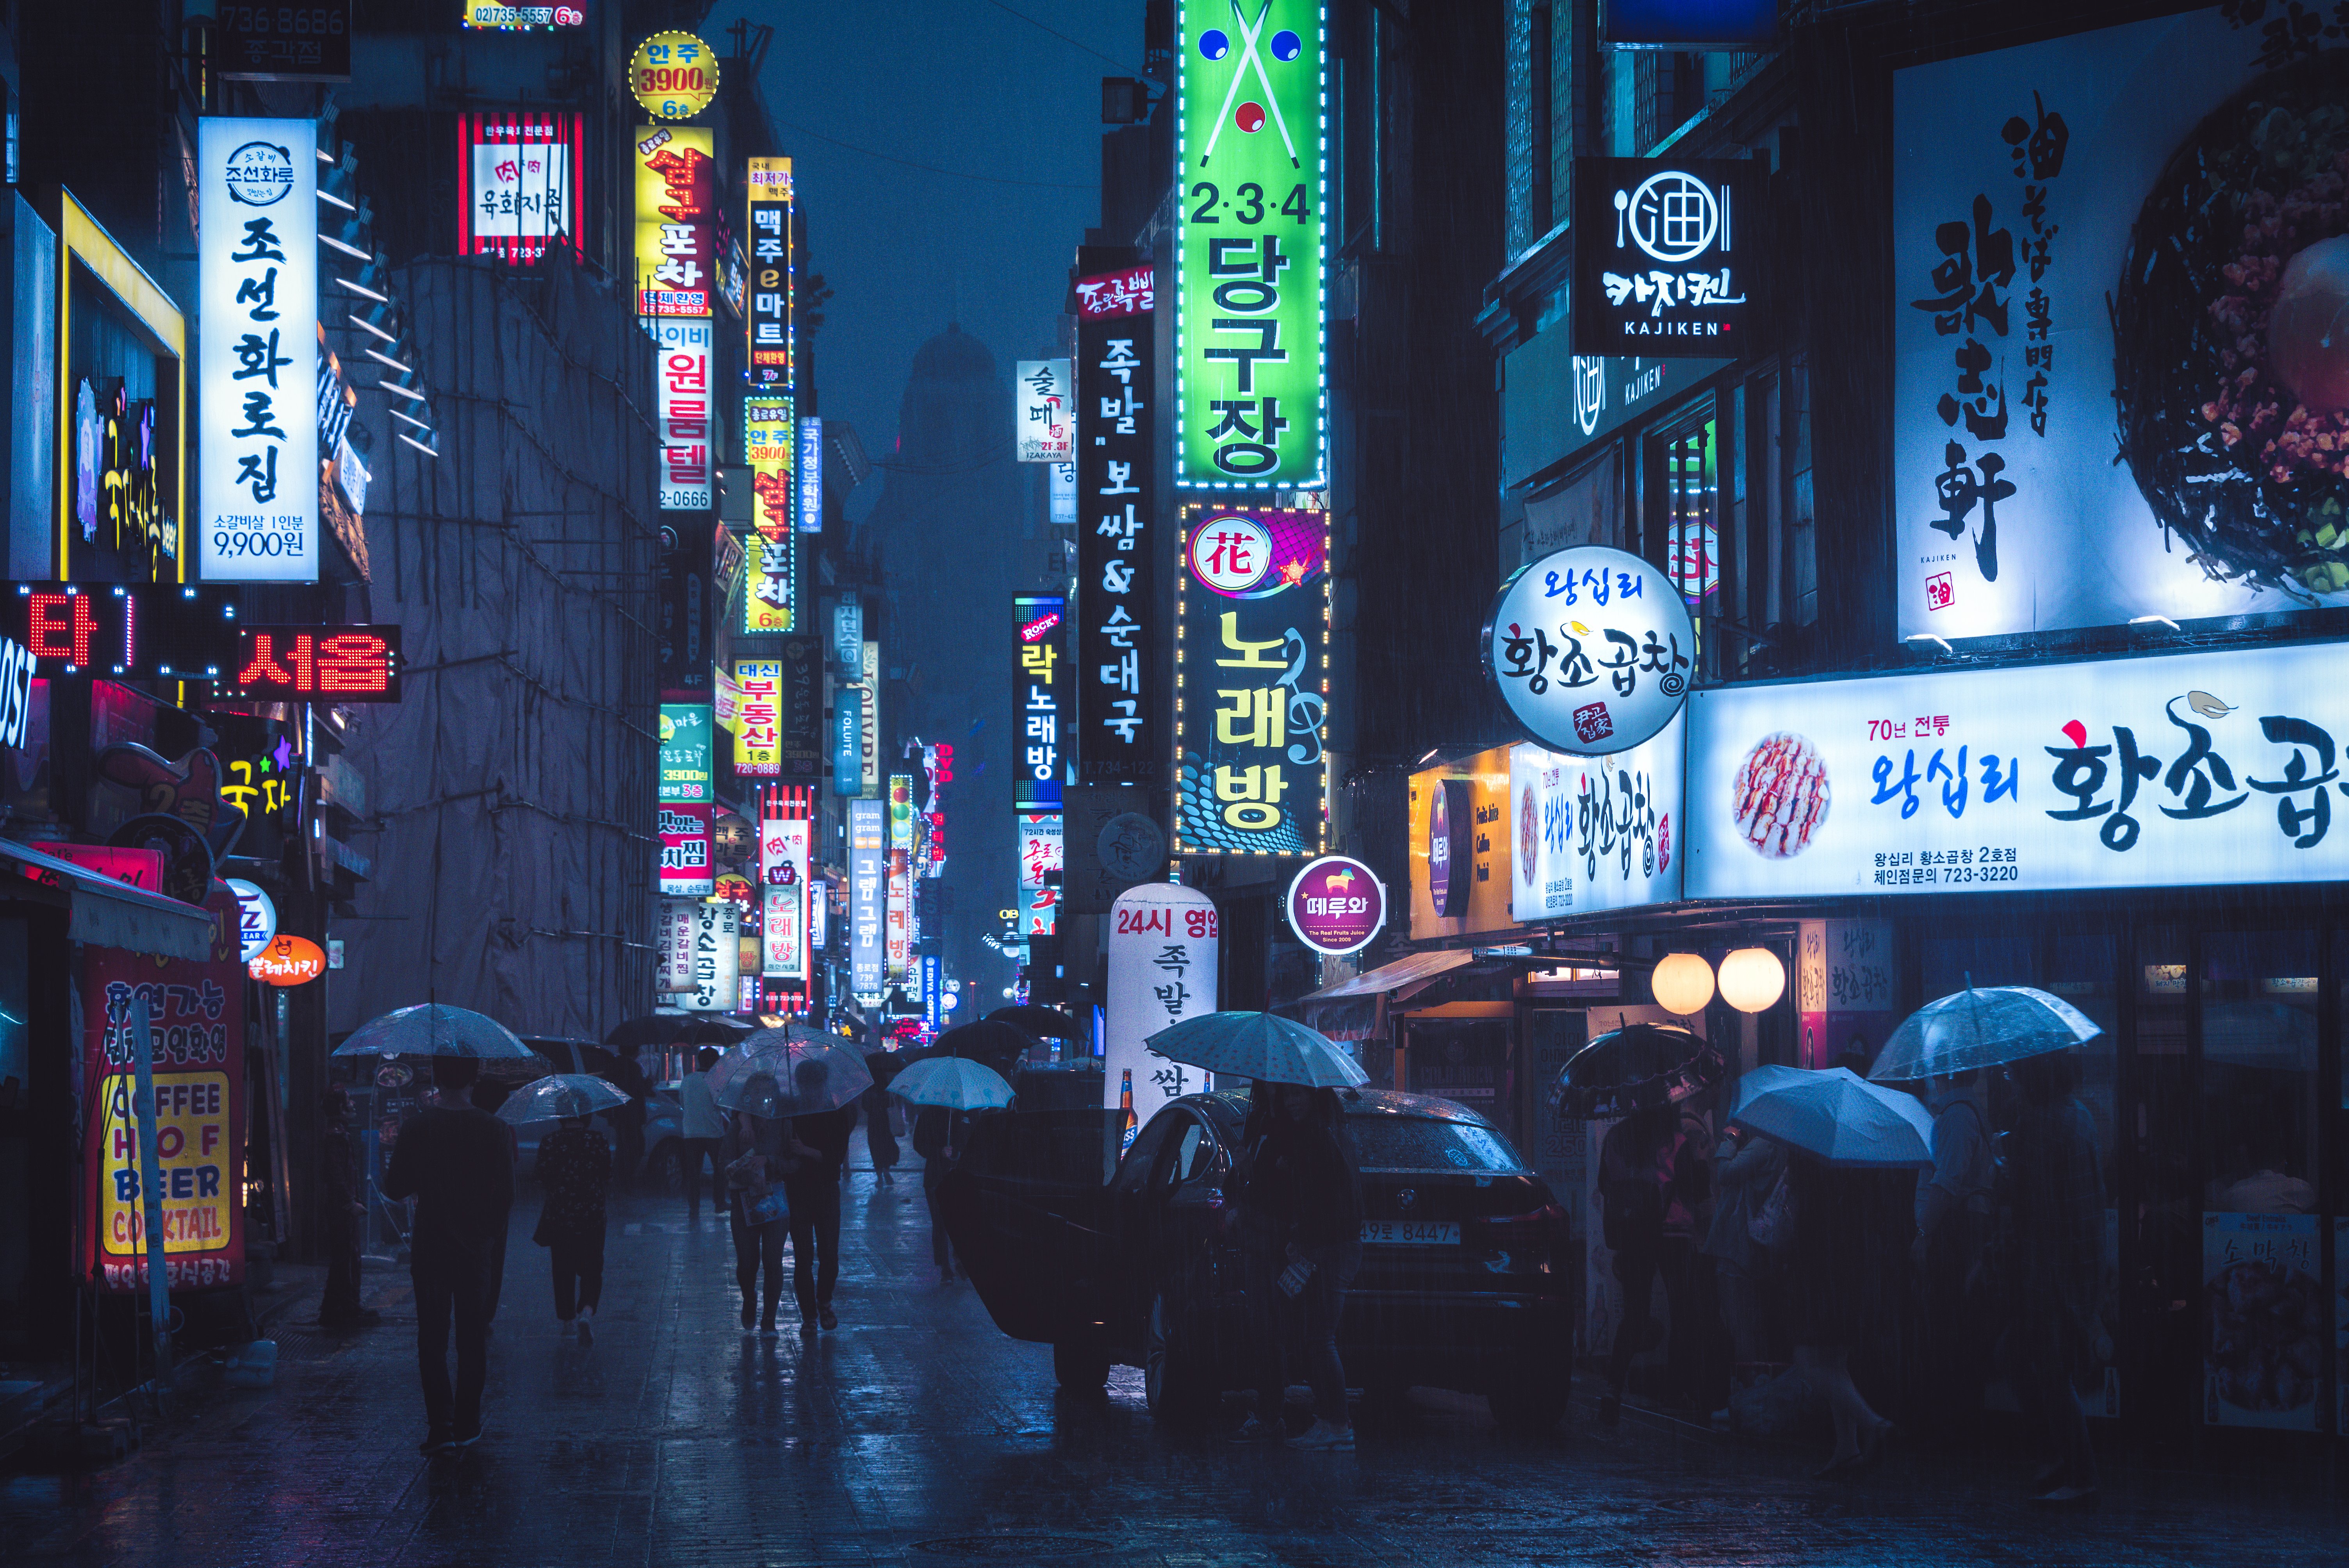 Rainy 4K wallpaper for your desktop or mobile screen free and easy to download